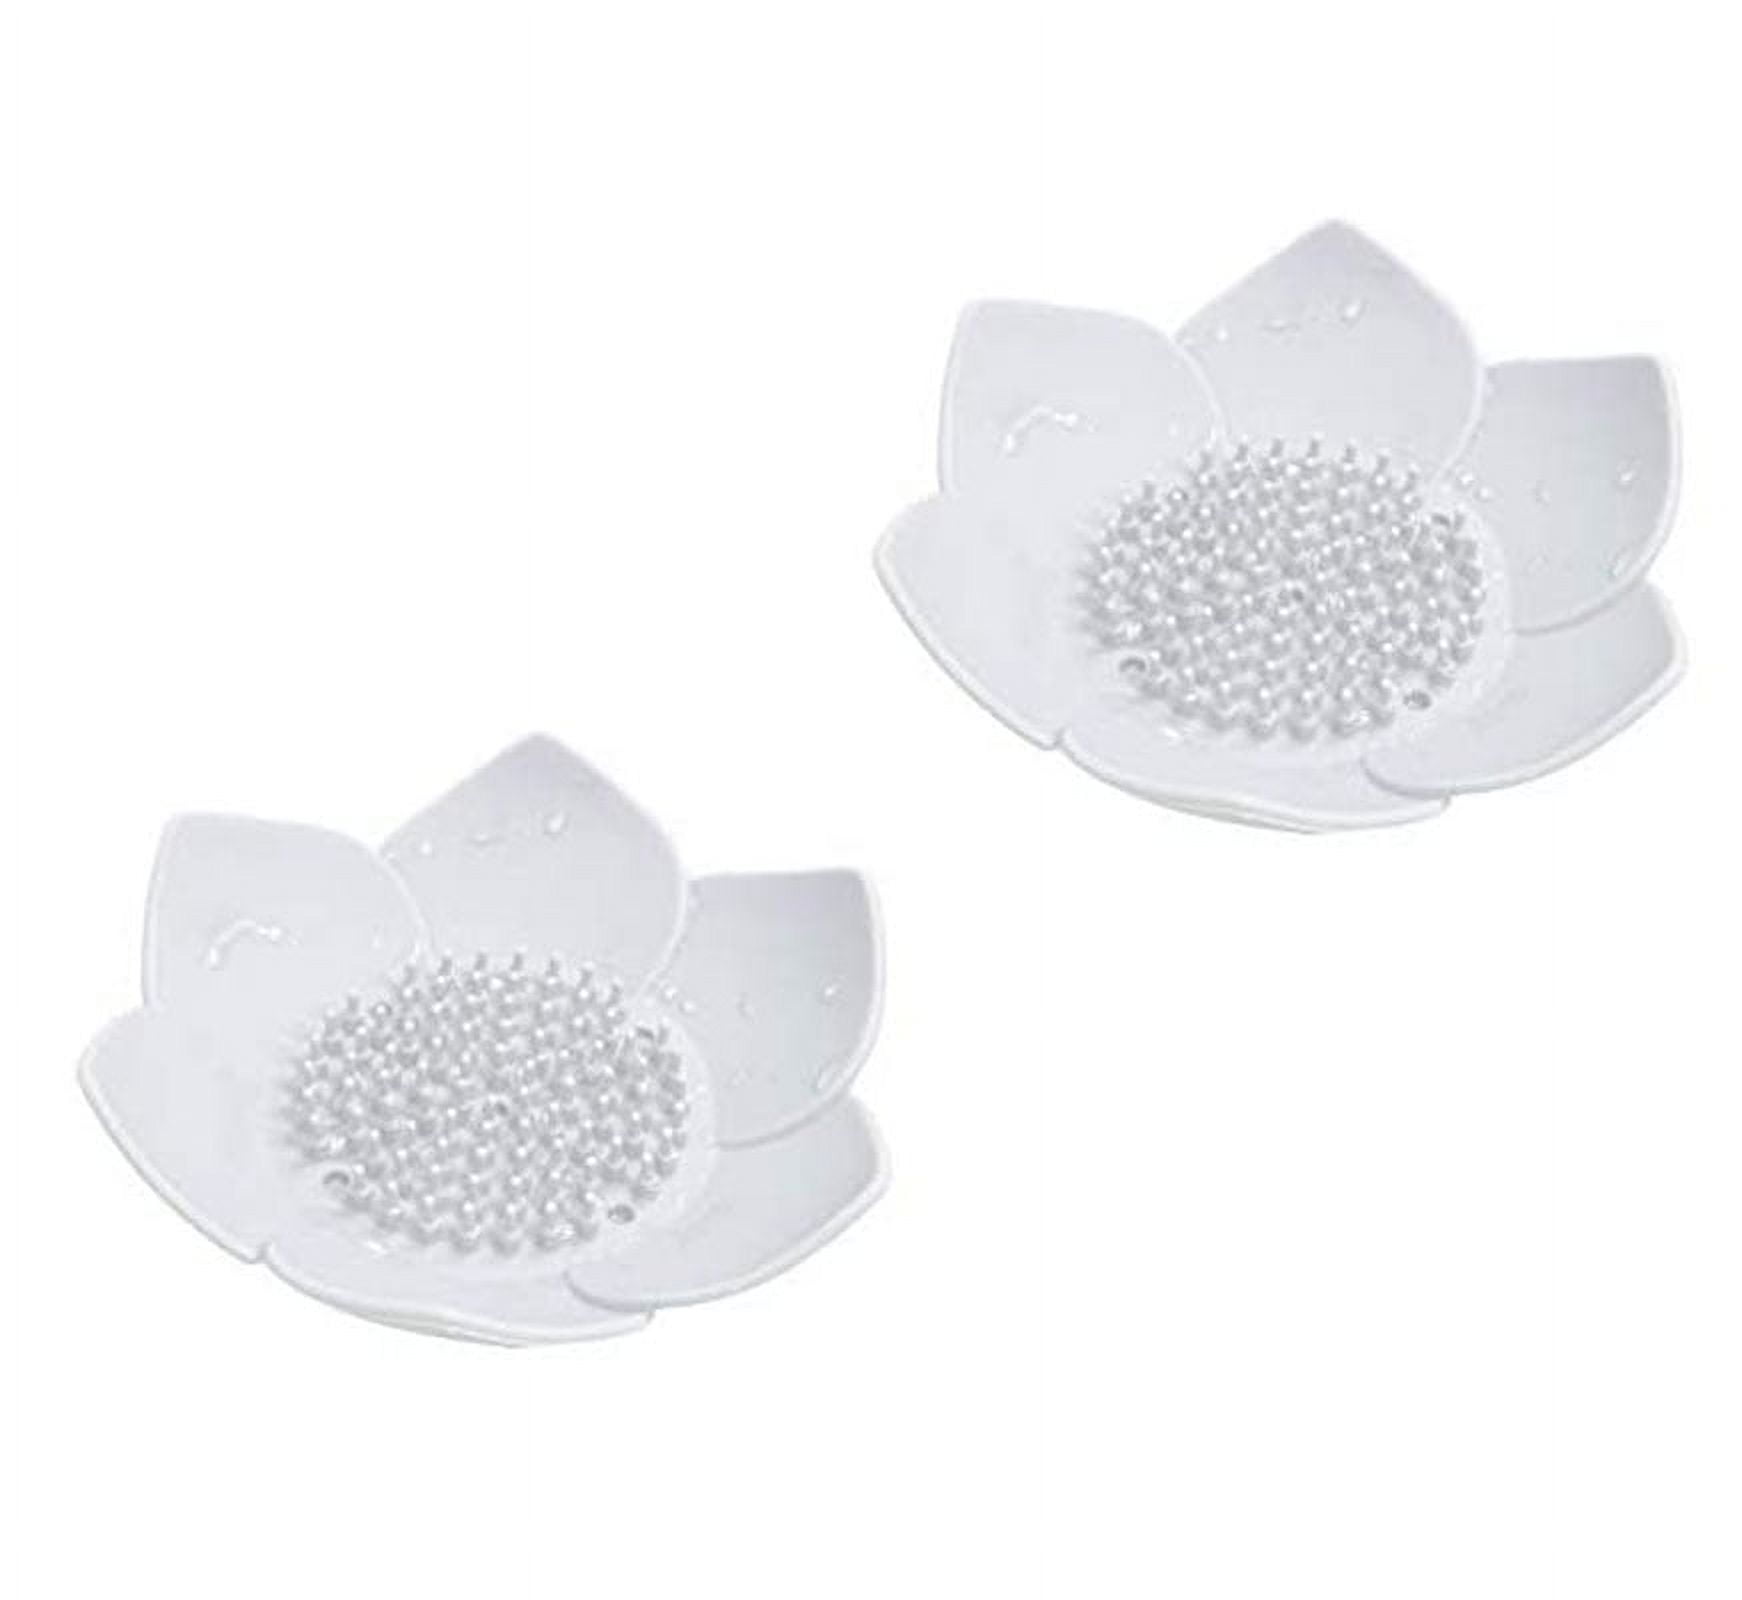 Lotus Shower Steamer Tray, Silicone Soap Dish, 4 Pack Lotus Flower Shape  Shower Steamer Tray Small Self Draining Bar Soap Holder for Kitchen  Bathroom